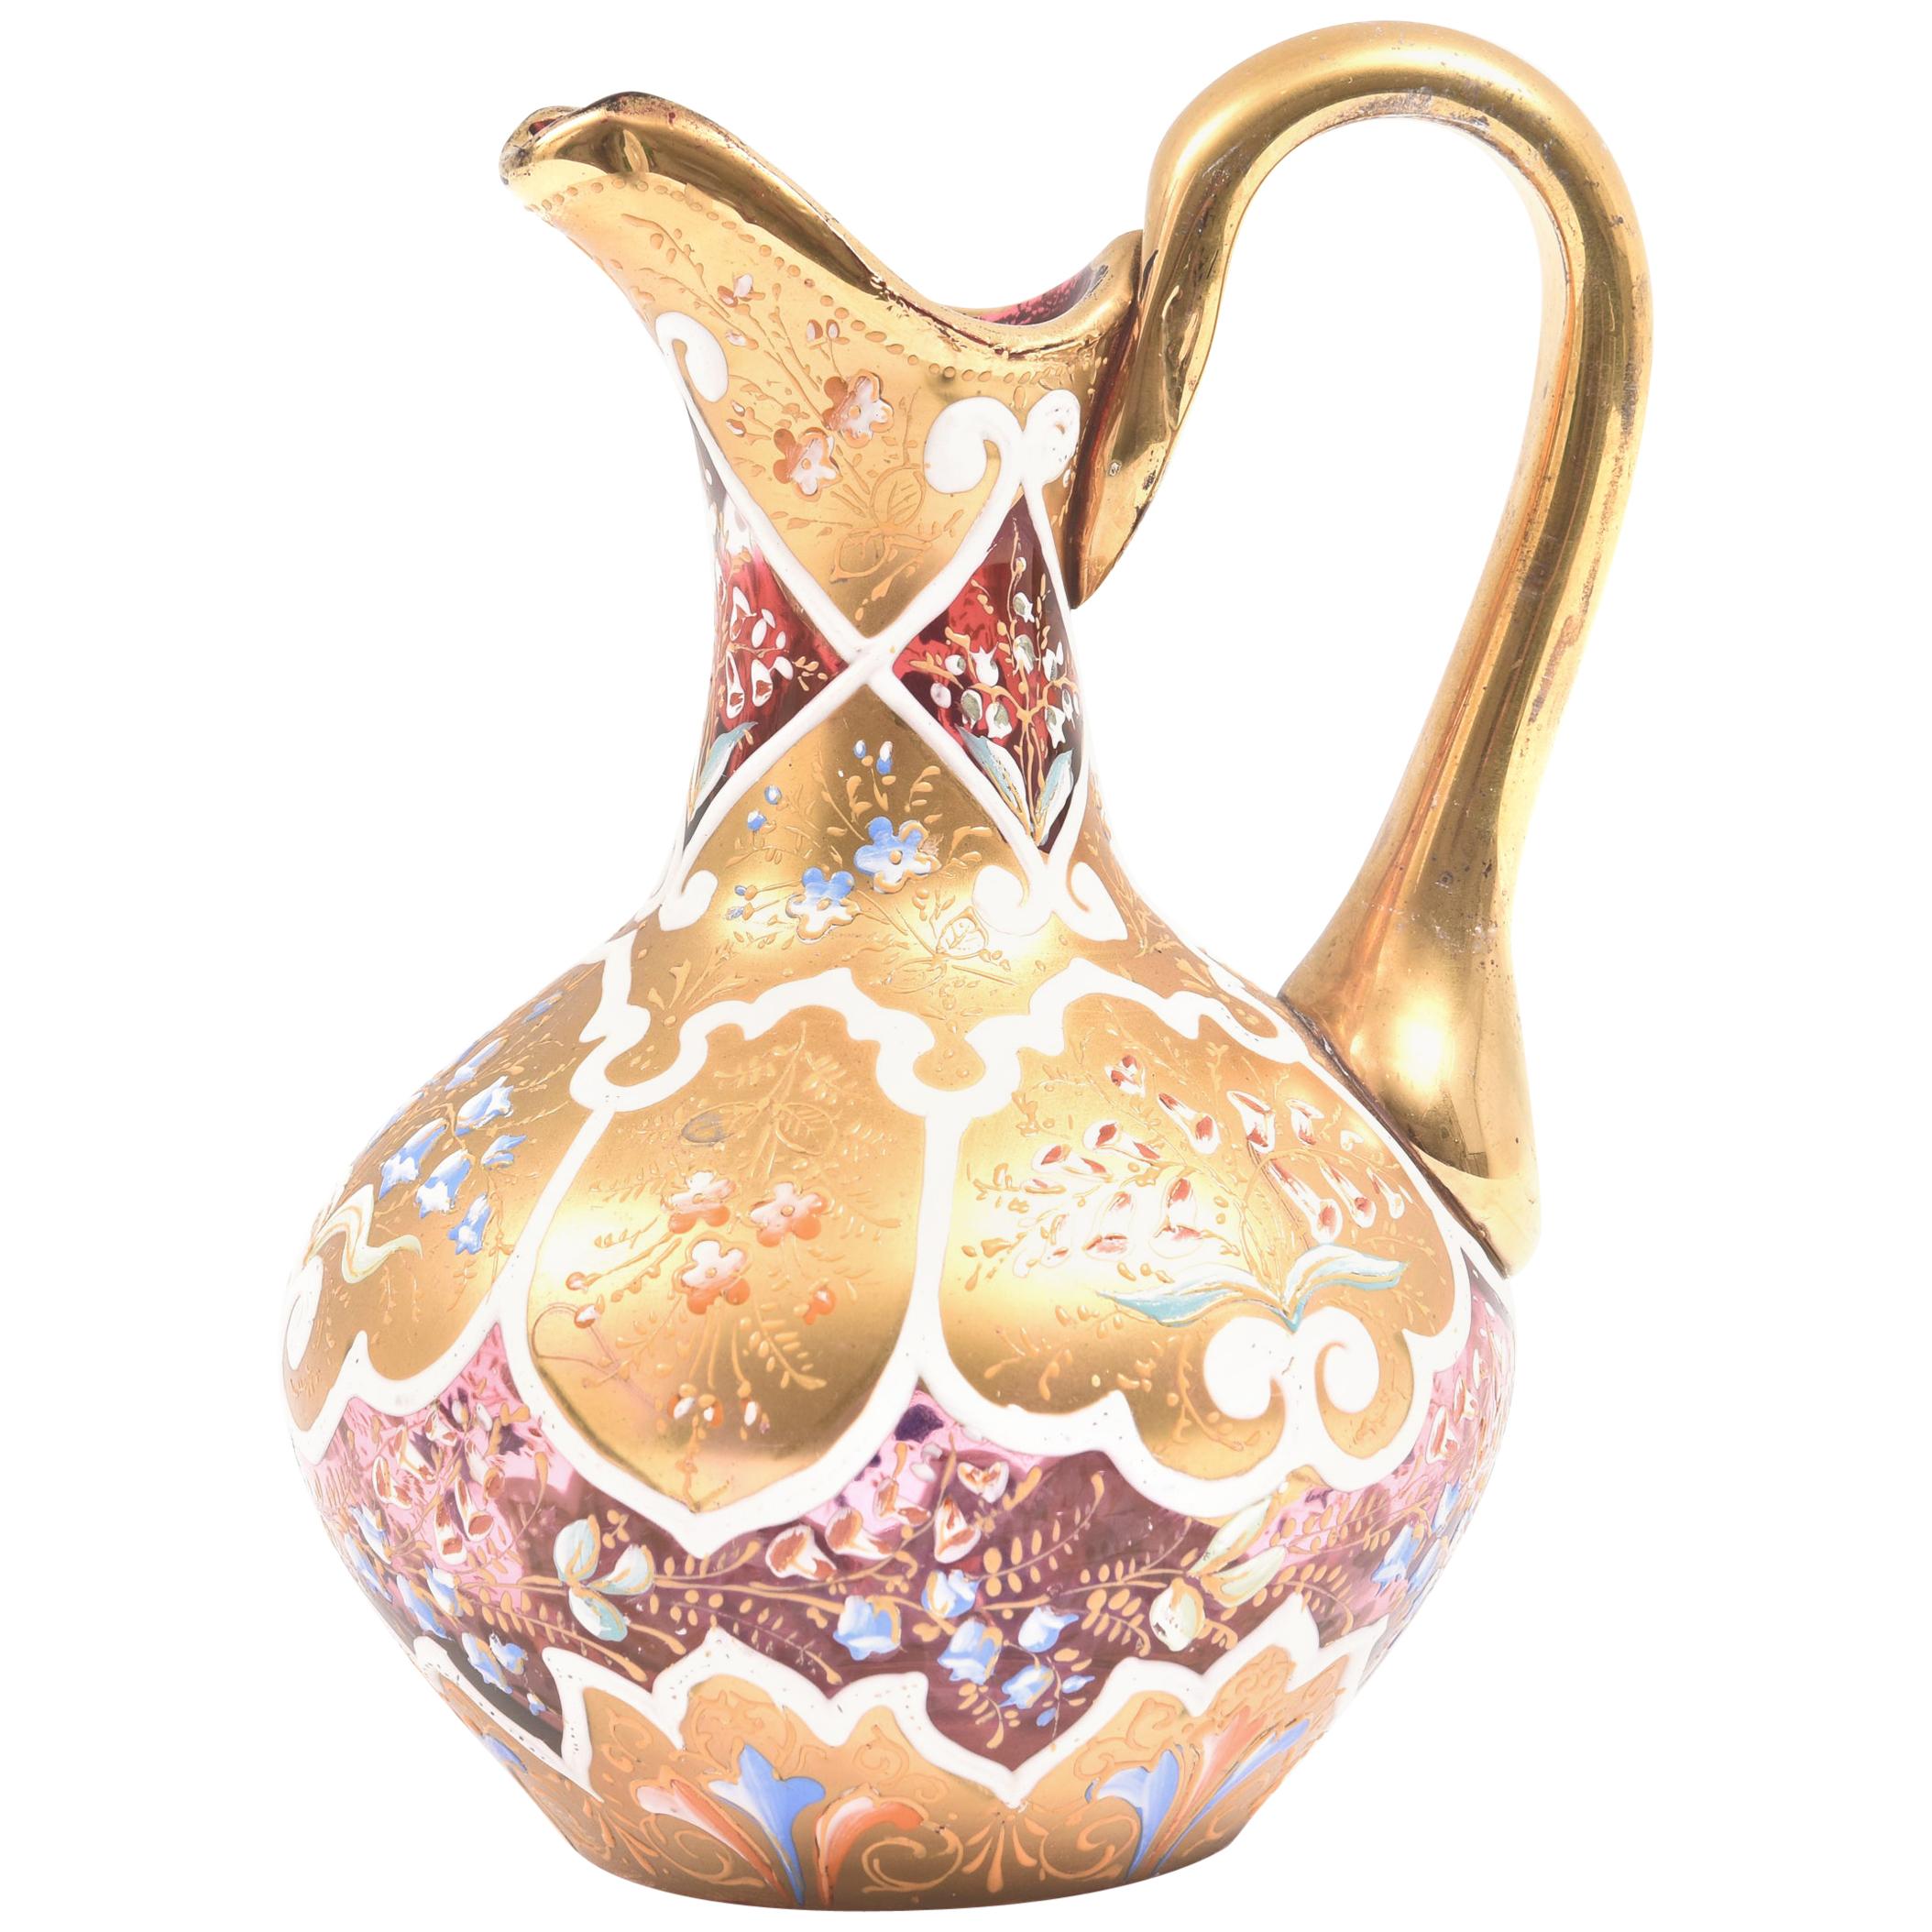 Ornate Moser Glass Enamel and Gilt Pitcher or Ewer, 19th Century For Sale